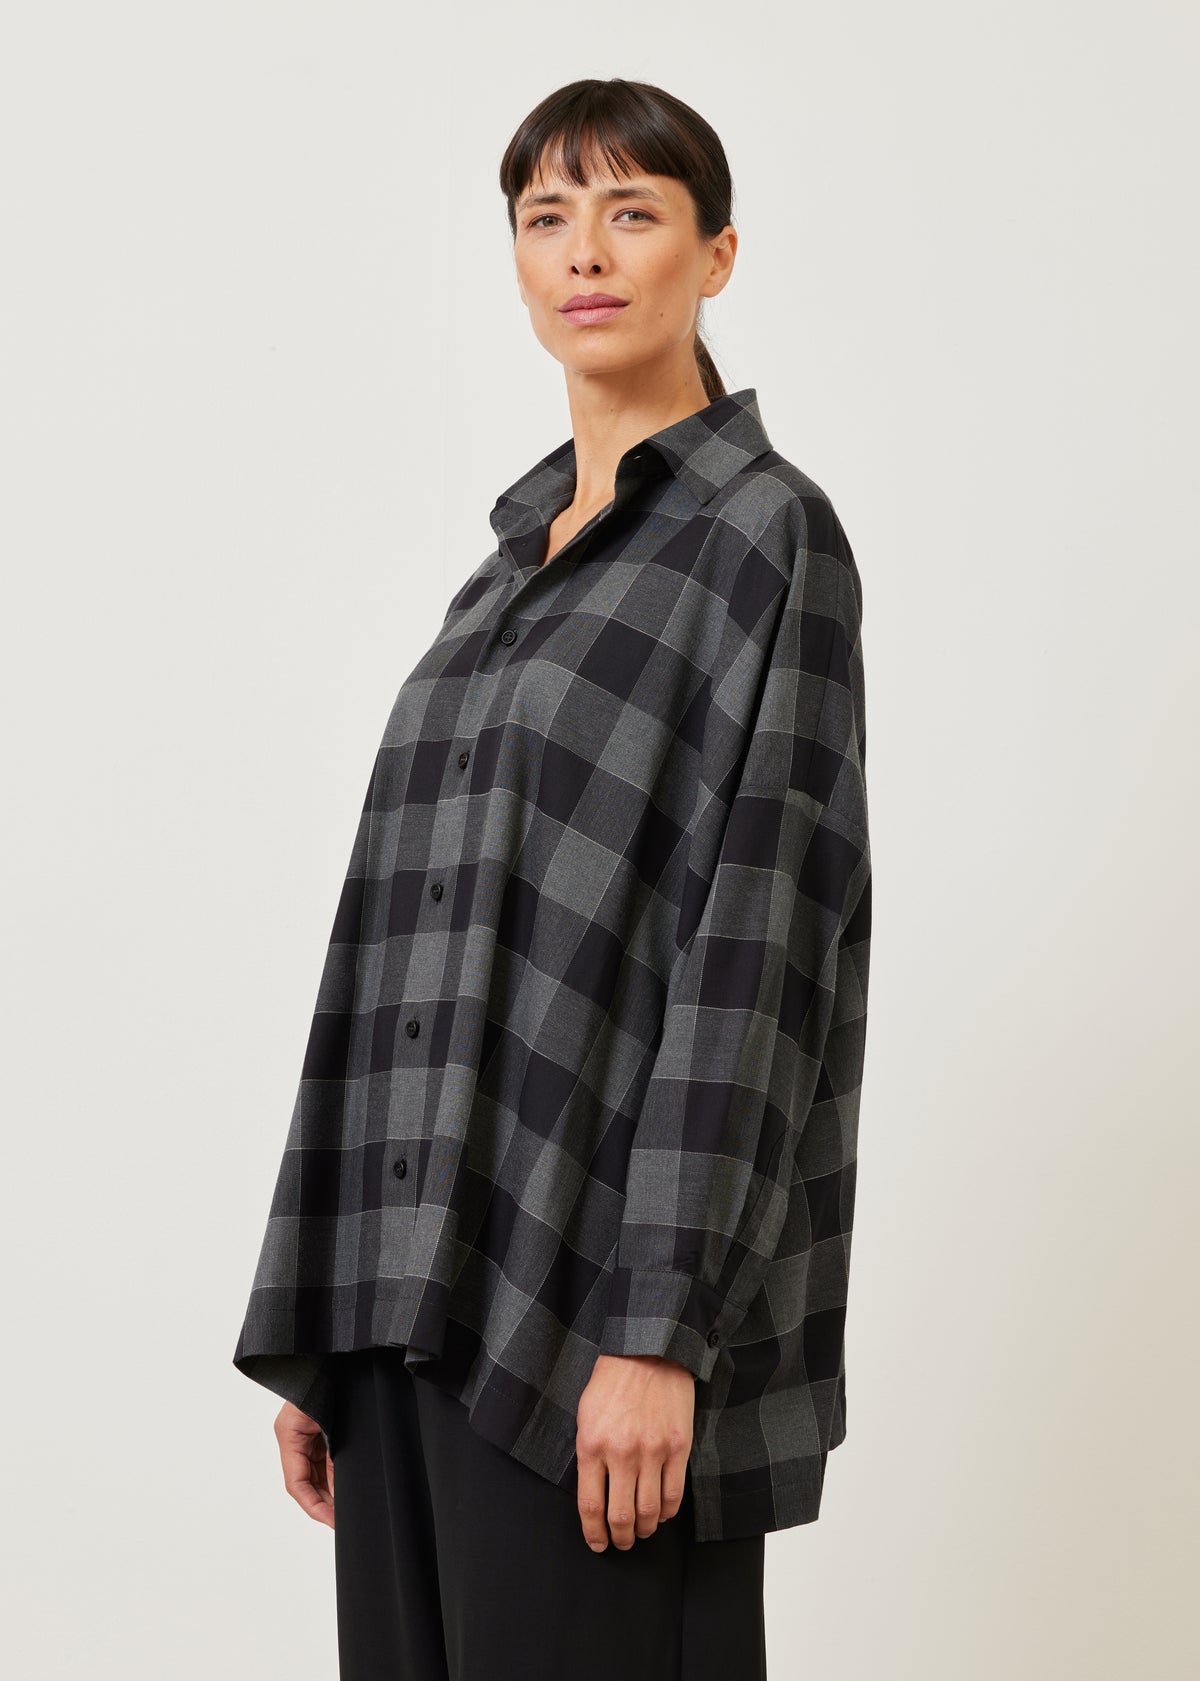 large plaid wide shirt with collar (long)